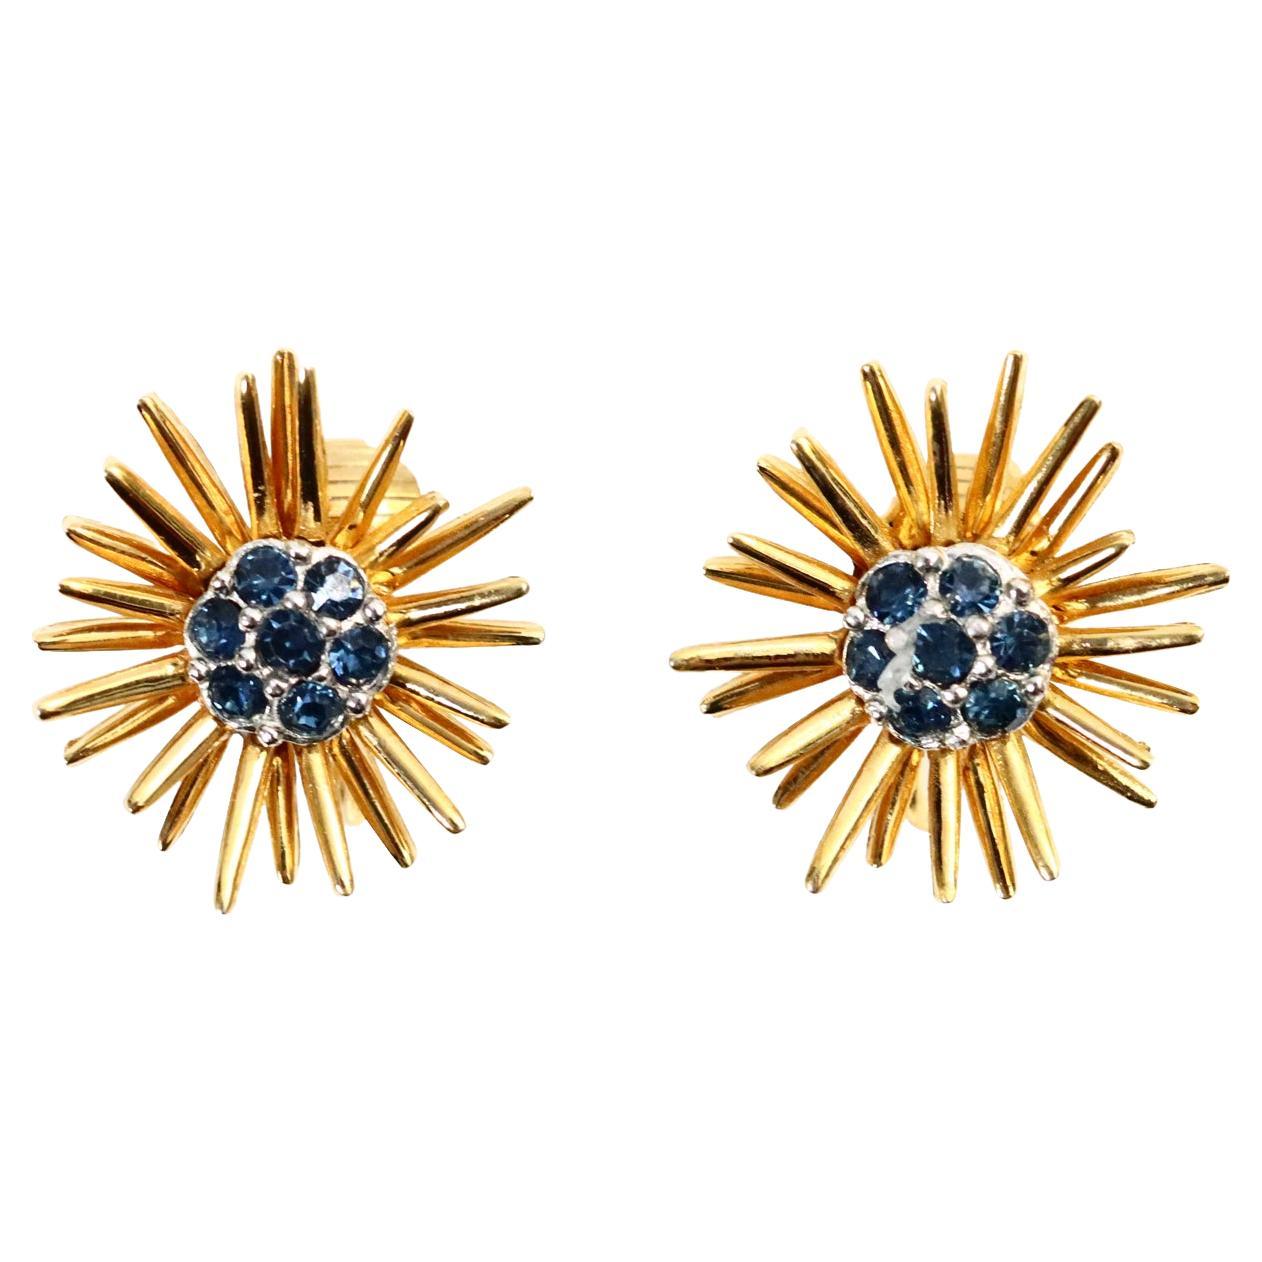 Vintage D'orlan Gold Starburst with Blue Diamante Earrings Circa 1980s